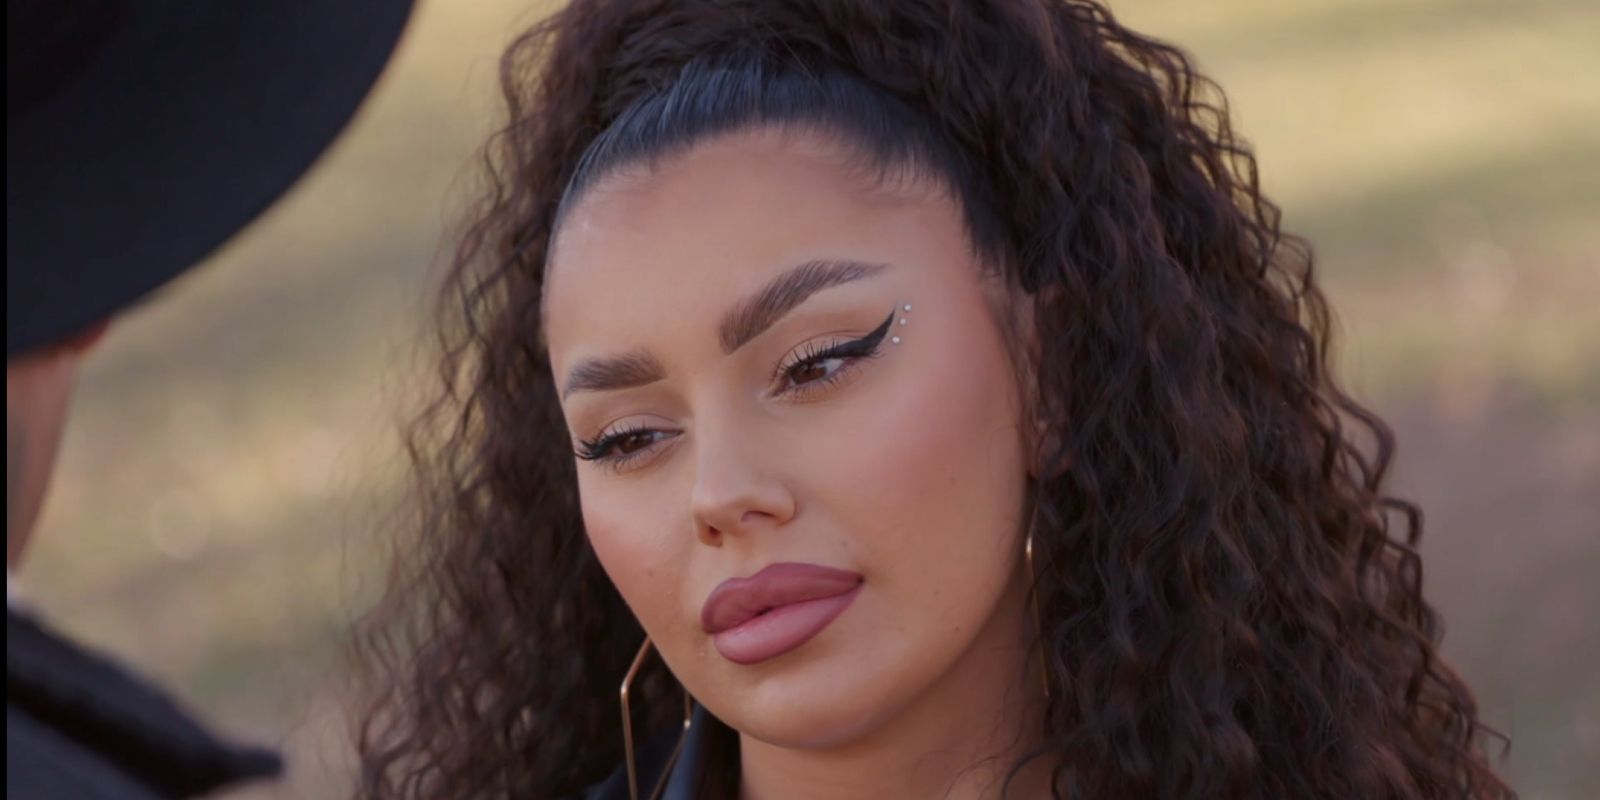 Miona Bell on 90 Day Fiancé season 9 looks very serious